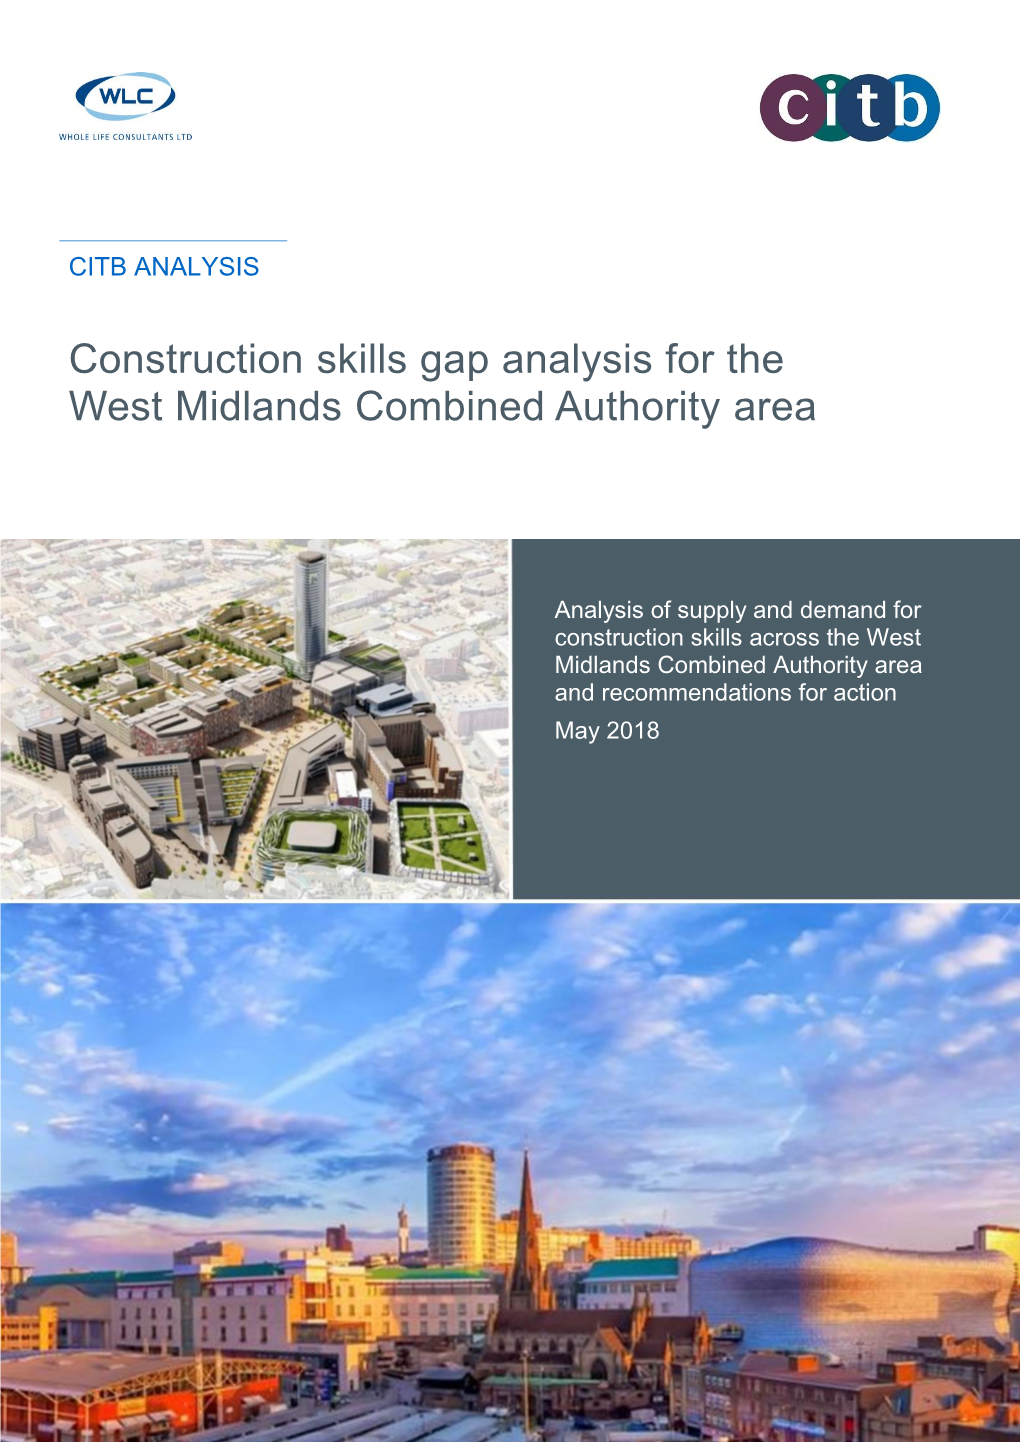 Construction Skills Gap Analysis for the West Midlands Combined Authority Area